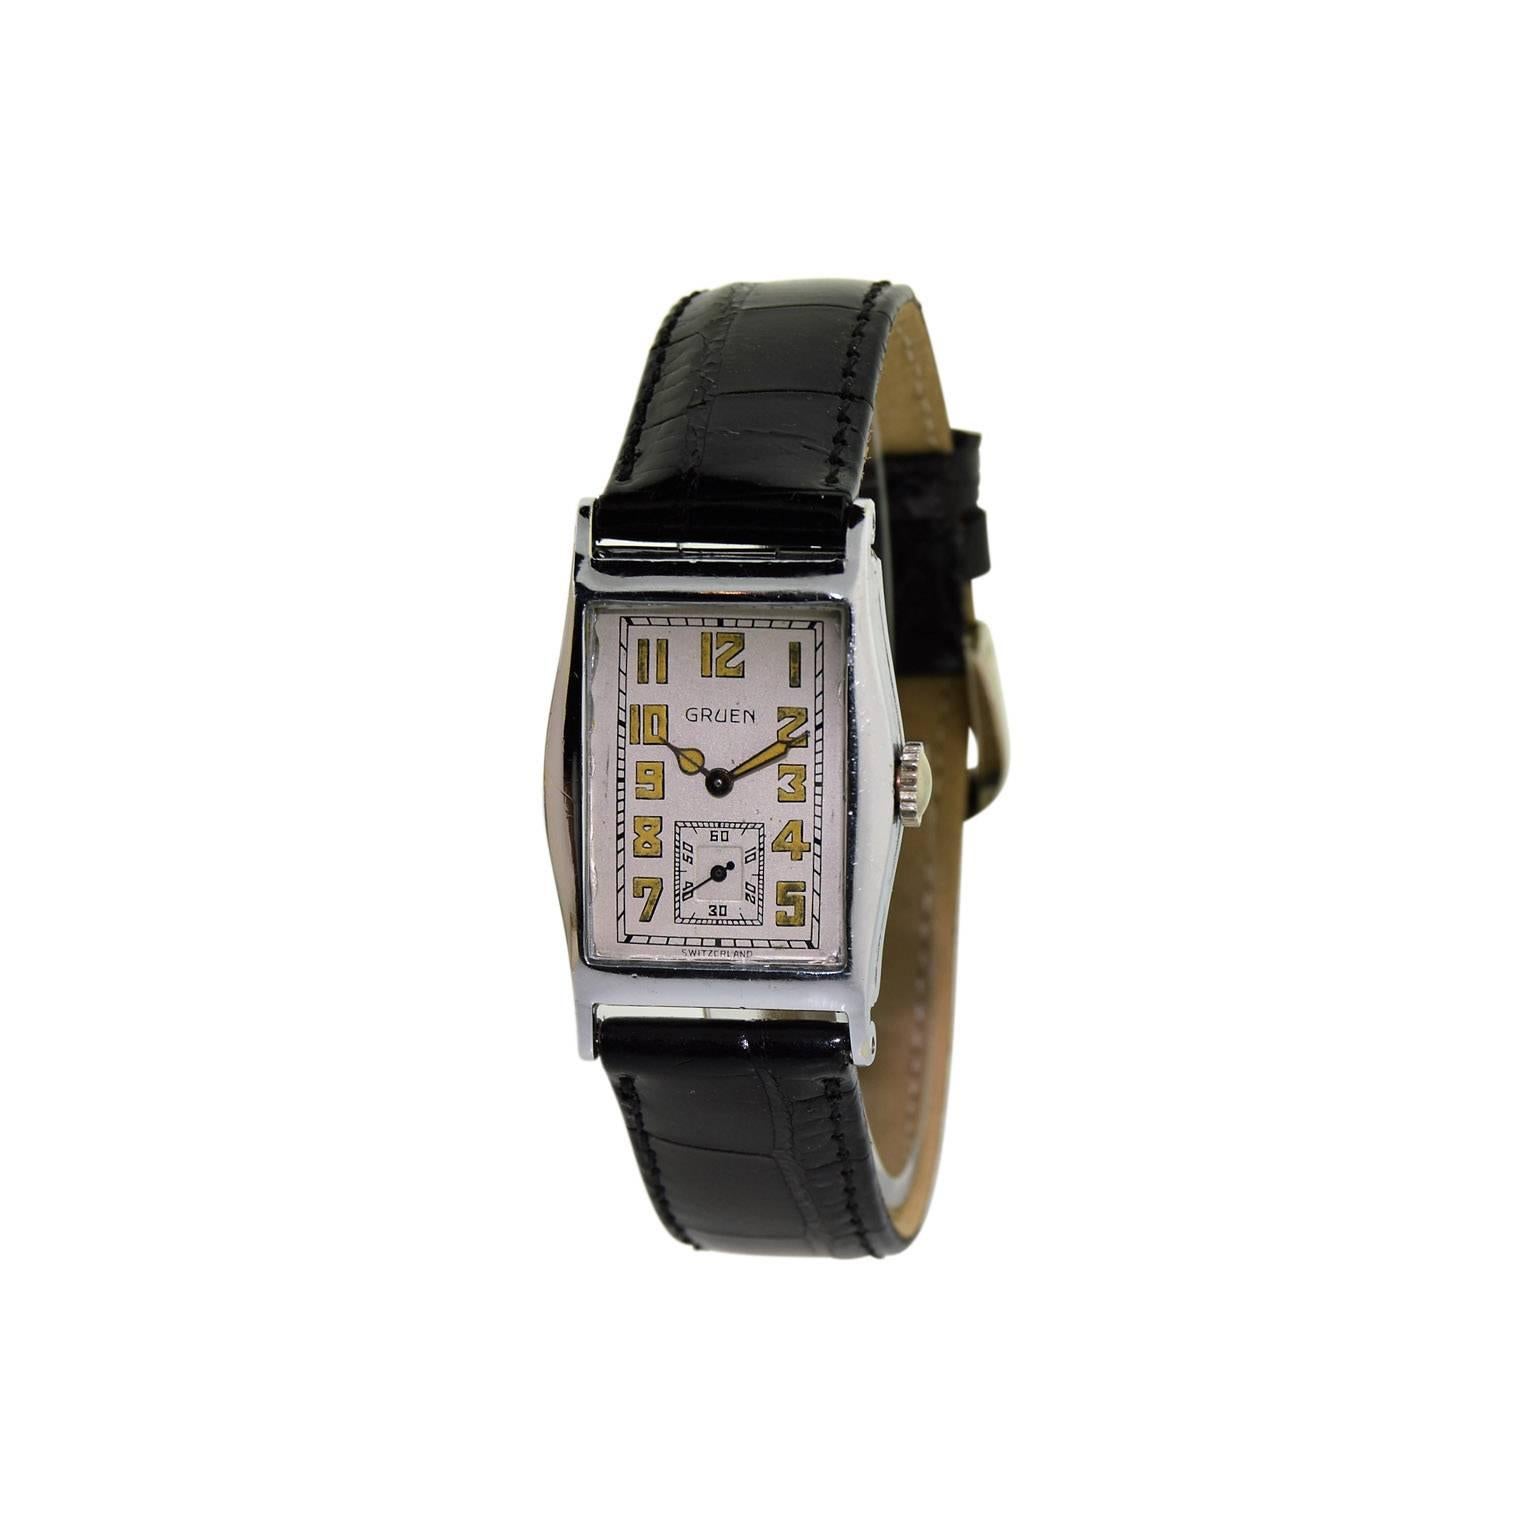 FACTORY / HOUSE: Gruen Watch Company
STYLE / REFERENCE: Art Deco
METAL / MATERIAL: 14kt. Solid Gold with Chrome Overlay
CIRCA: 1928 
DIMENSIONS: 38mm X 24mm
MOVEMENT / CALIBER: Manual Winding / 17 Jewels 
DIAL / HANDS: Original Silvered Luminous